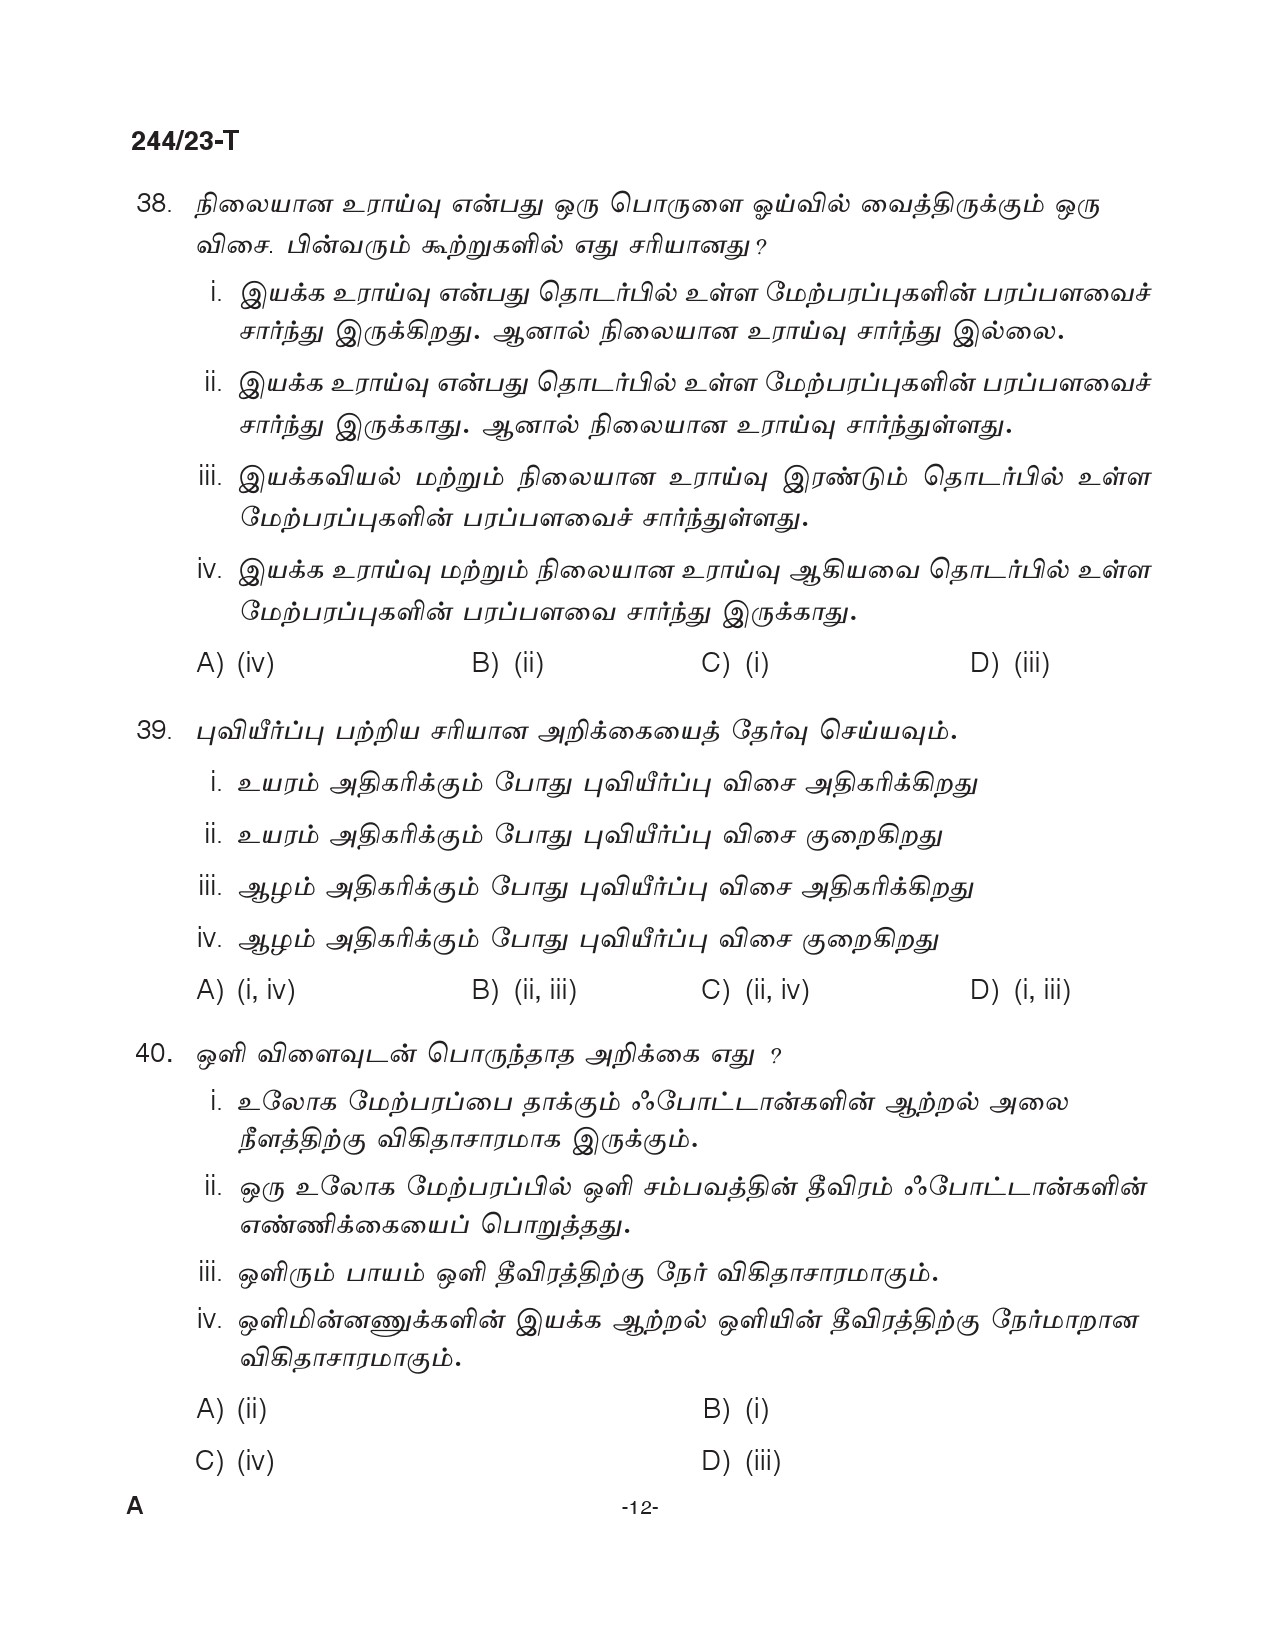 KPSC Fire and Rescue Officer Trainee Tamil Exam 2023 Code 2442023 T 11